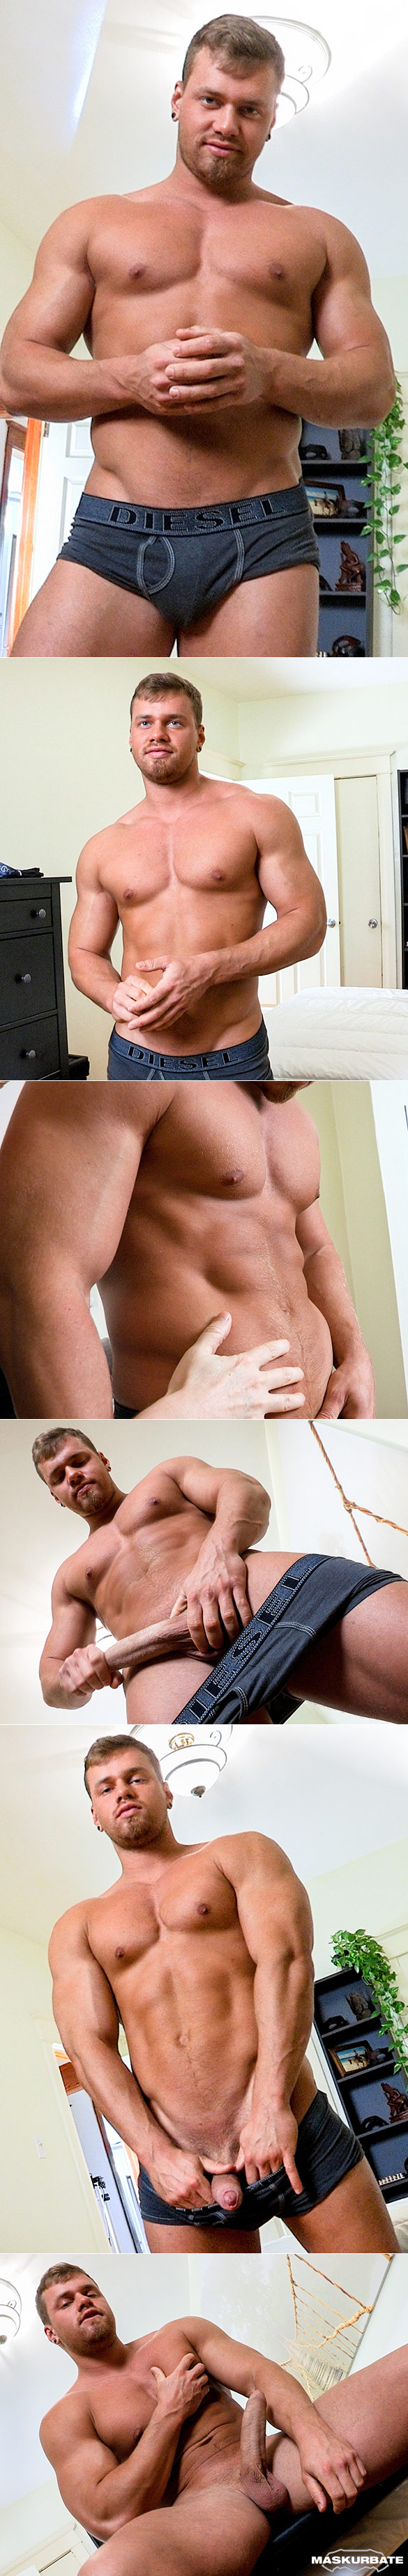 Maskurbate: Muscle stud Brad rubs one out